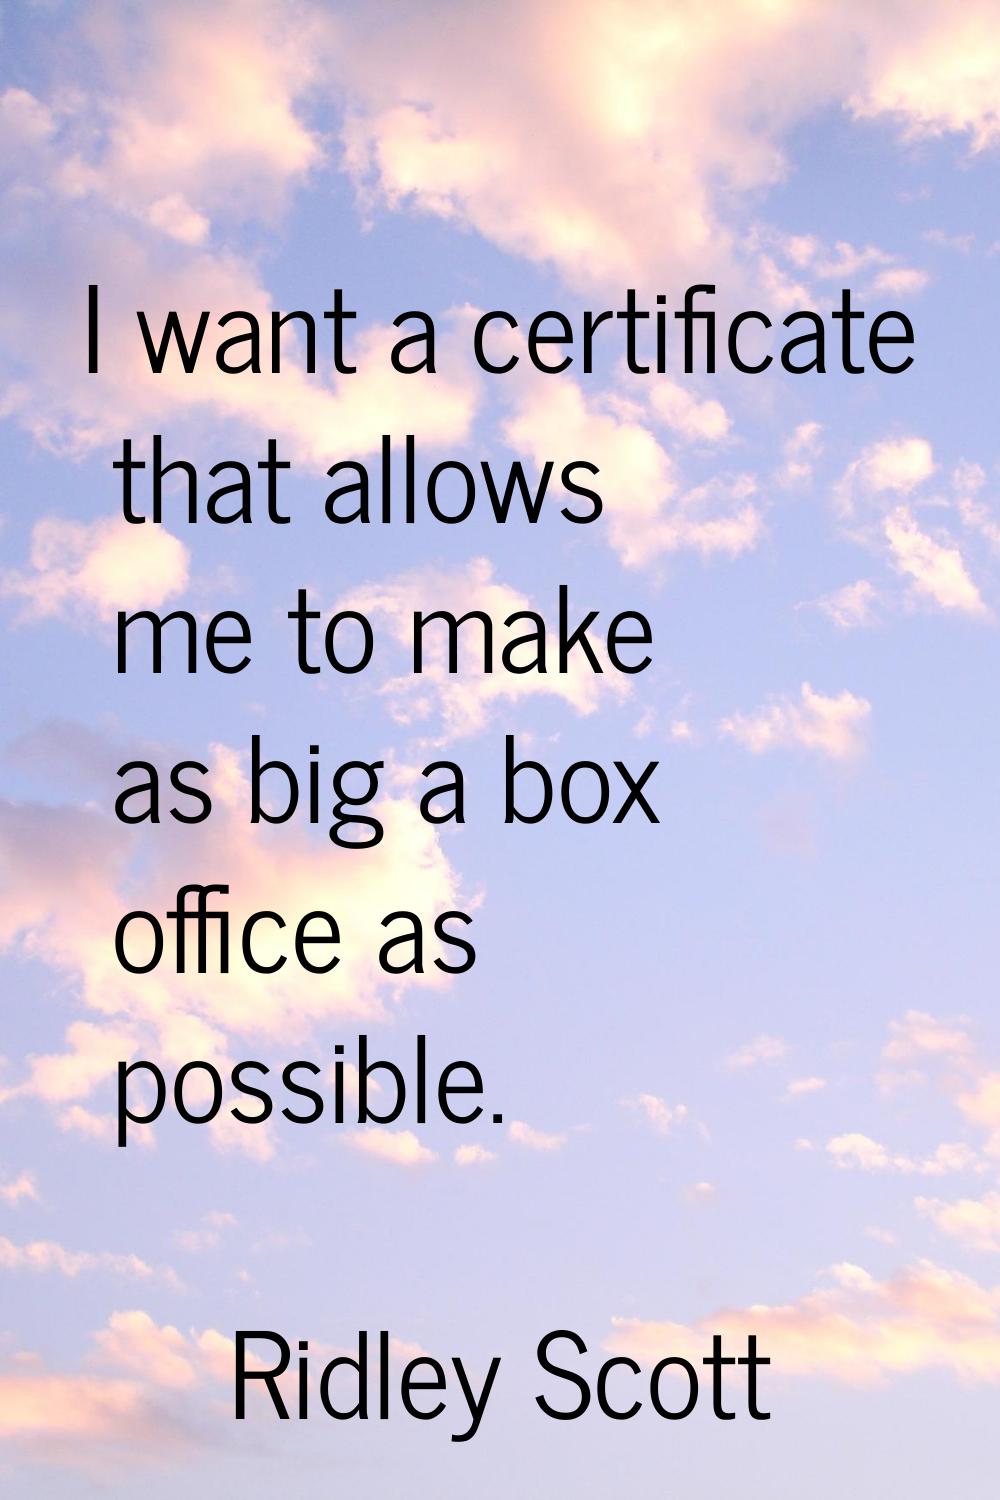 I want a certificate that allows me to make as big a box office as possible.